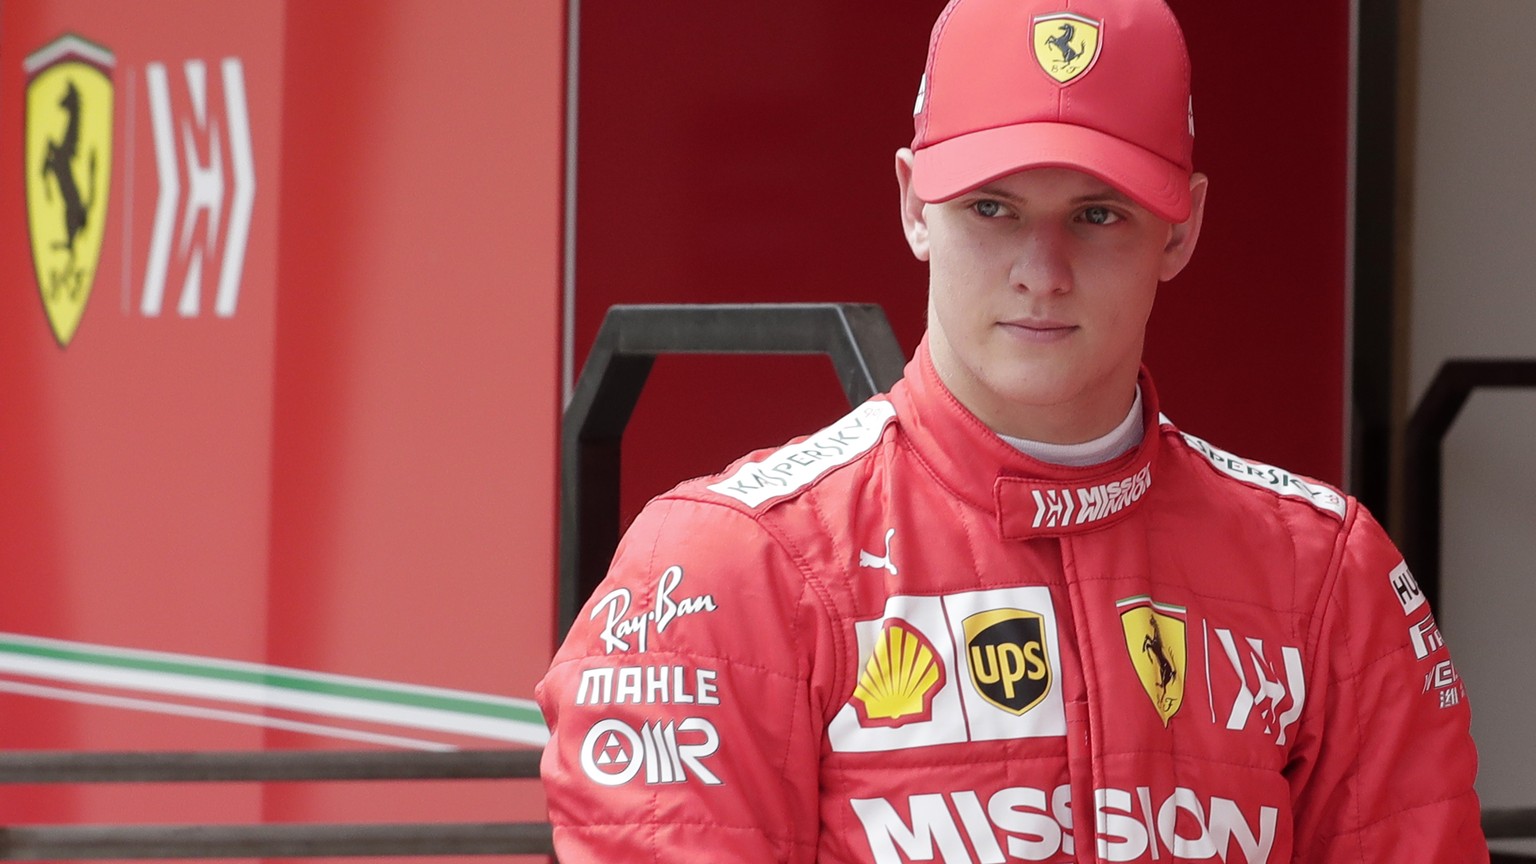 Mick Schumacher walks in the pit during his first F1 test for Ferrari at the Bahrain International Circuit in Sakhir, Bahrain, Tuesday, April 2, 2019. Mick Schumacher has moved closer to emulating his ...